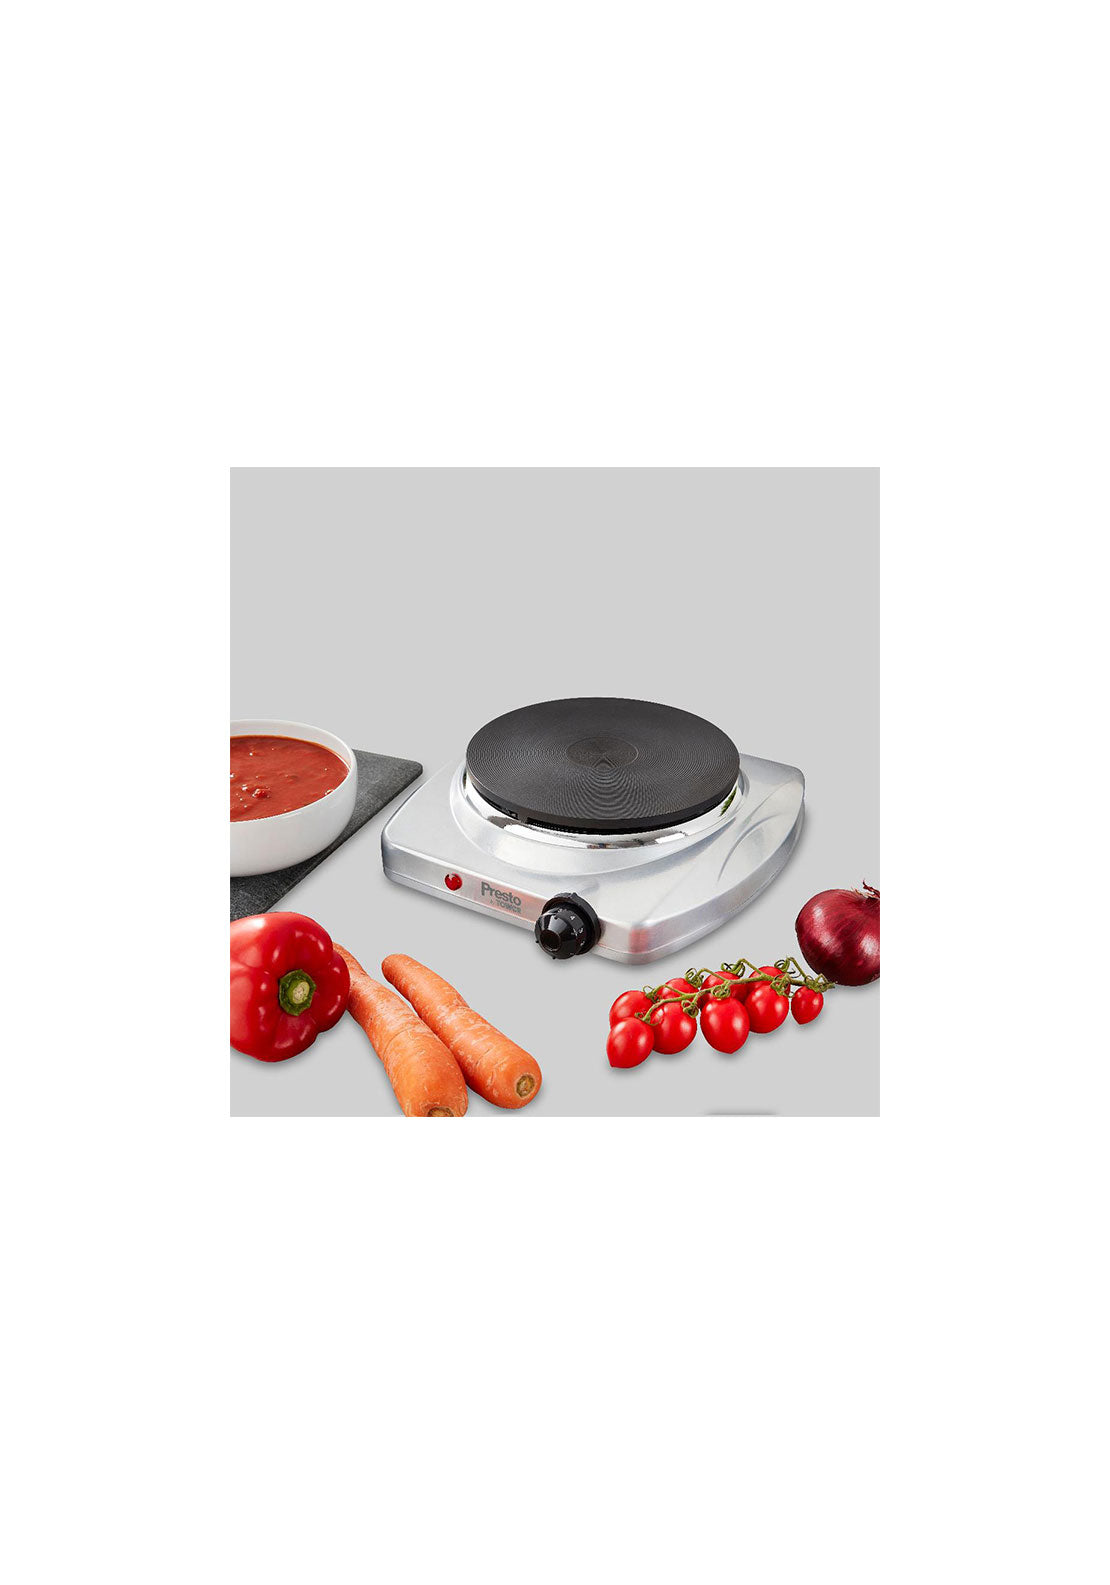 Tower Tower Presto 1400W Stainless Steel Hob | PT15003 2 Shaws Department Stores